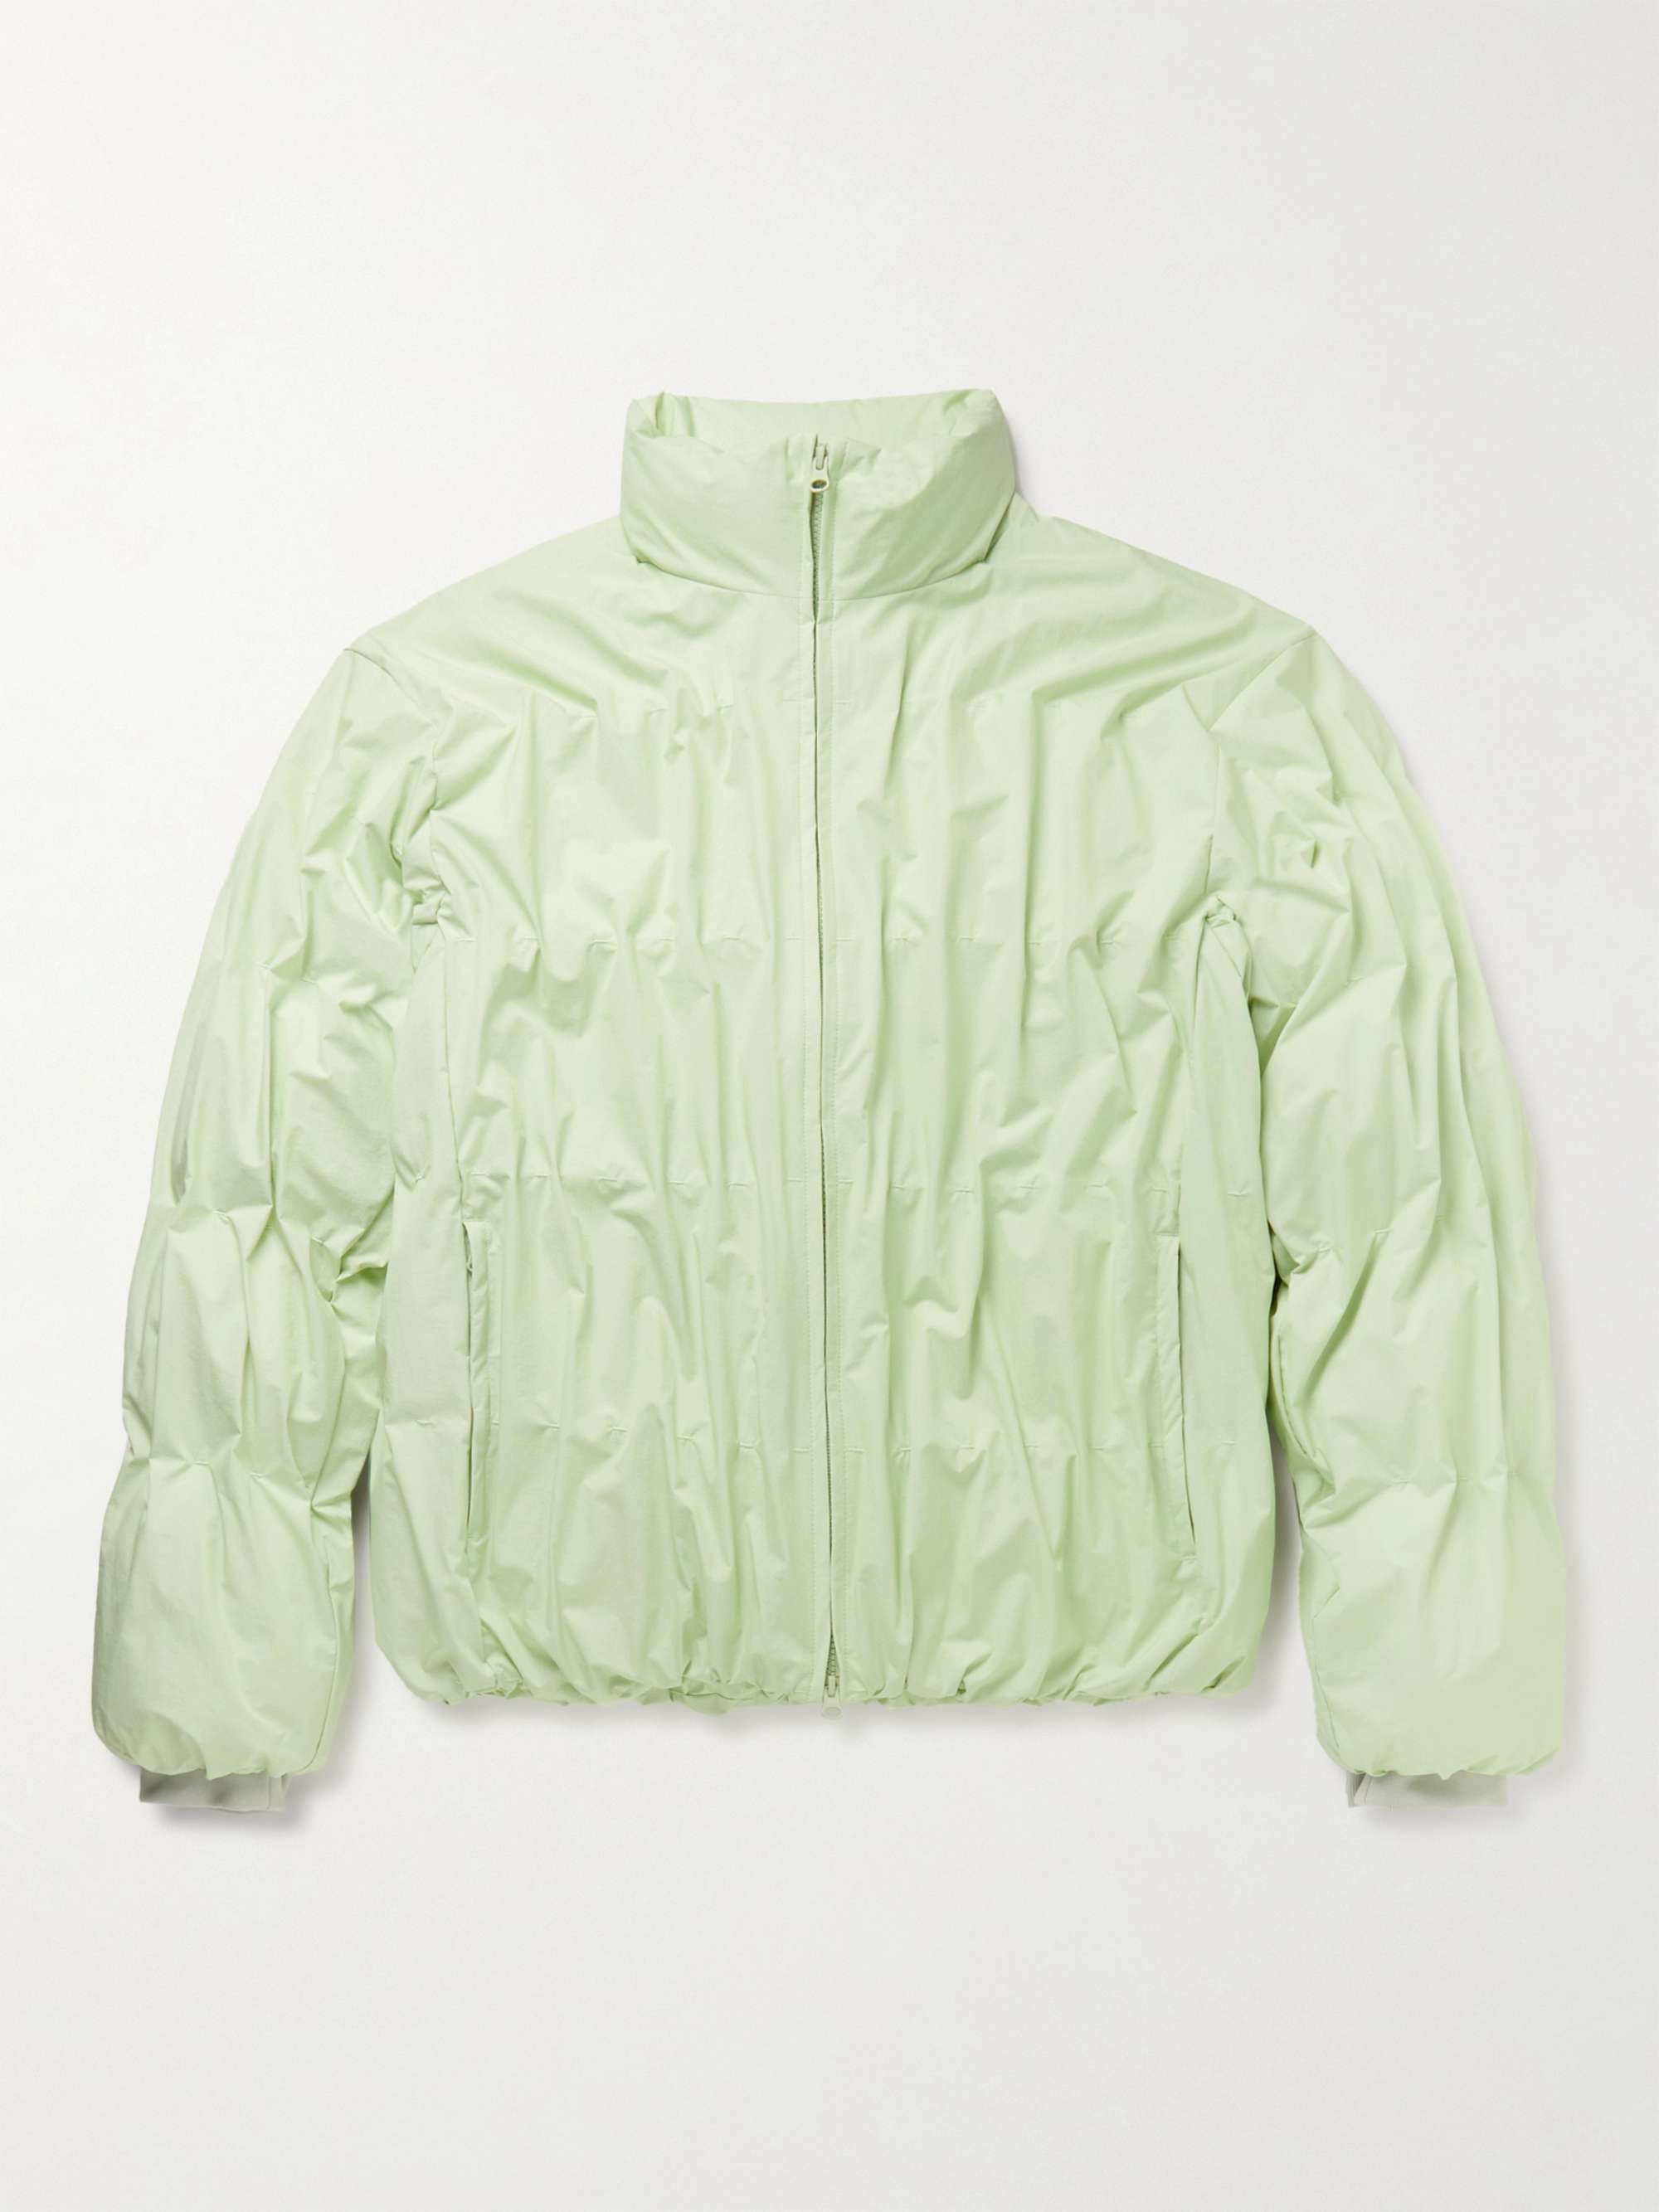 POST ARCHIVE FACTION 4.0+ Right Pleated Nylon-Ripstop Down Jacket